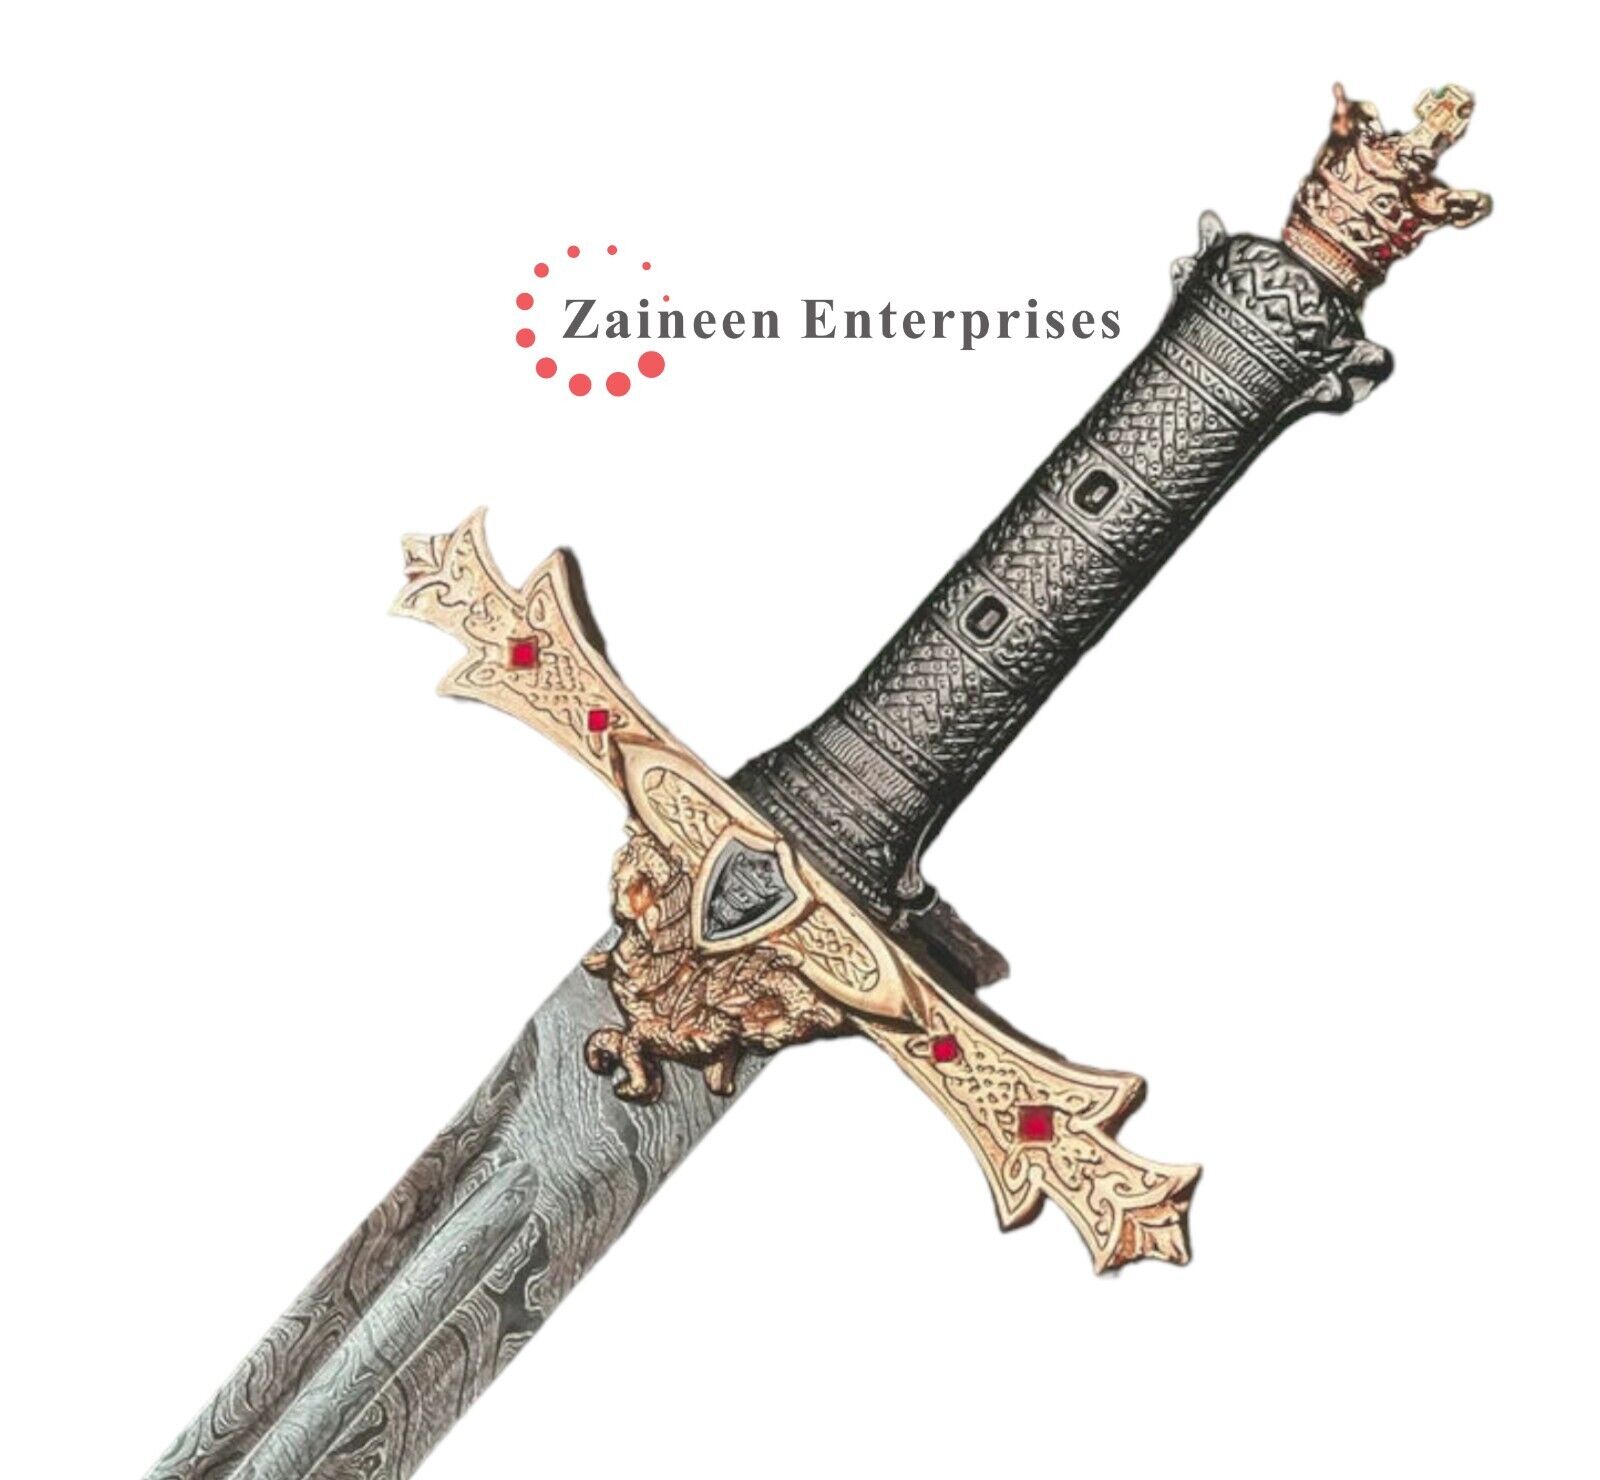 Unique Handmade Knights Excalibur Crown Sword with Cover